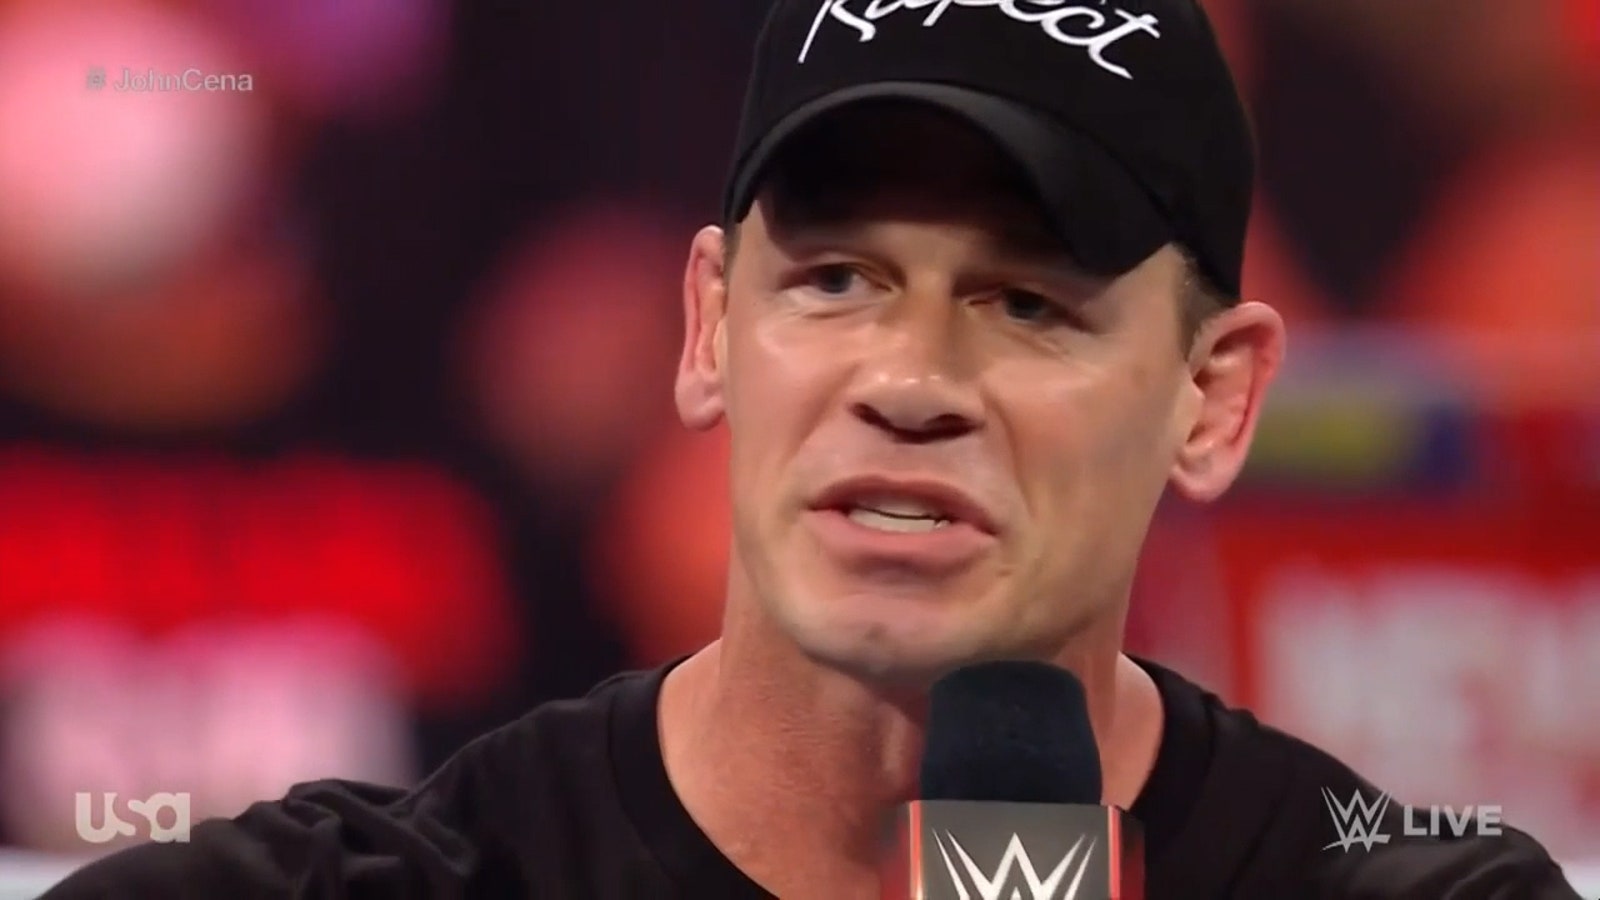 Vince McMahon introduces John Cena on his 20th WWE anniversary